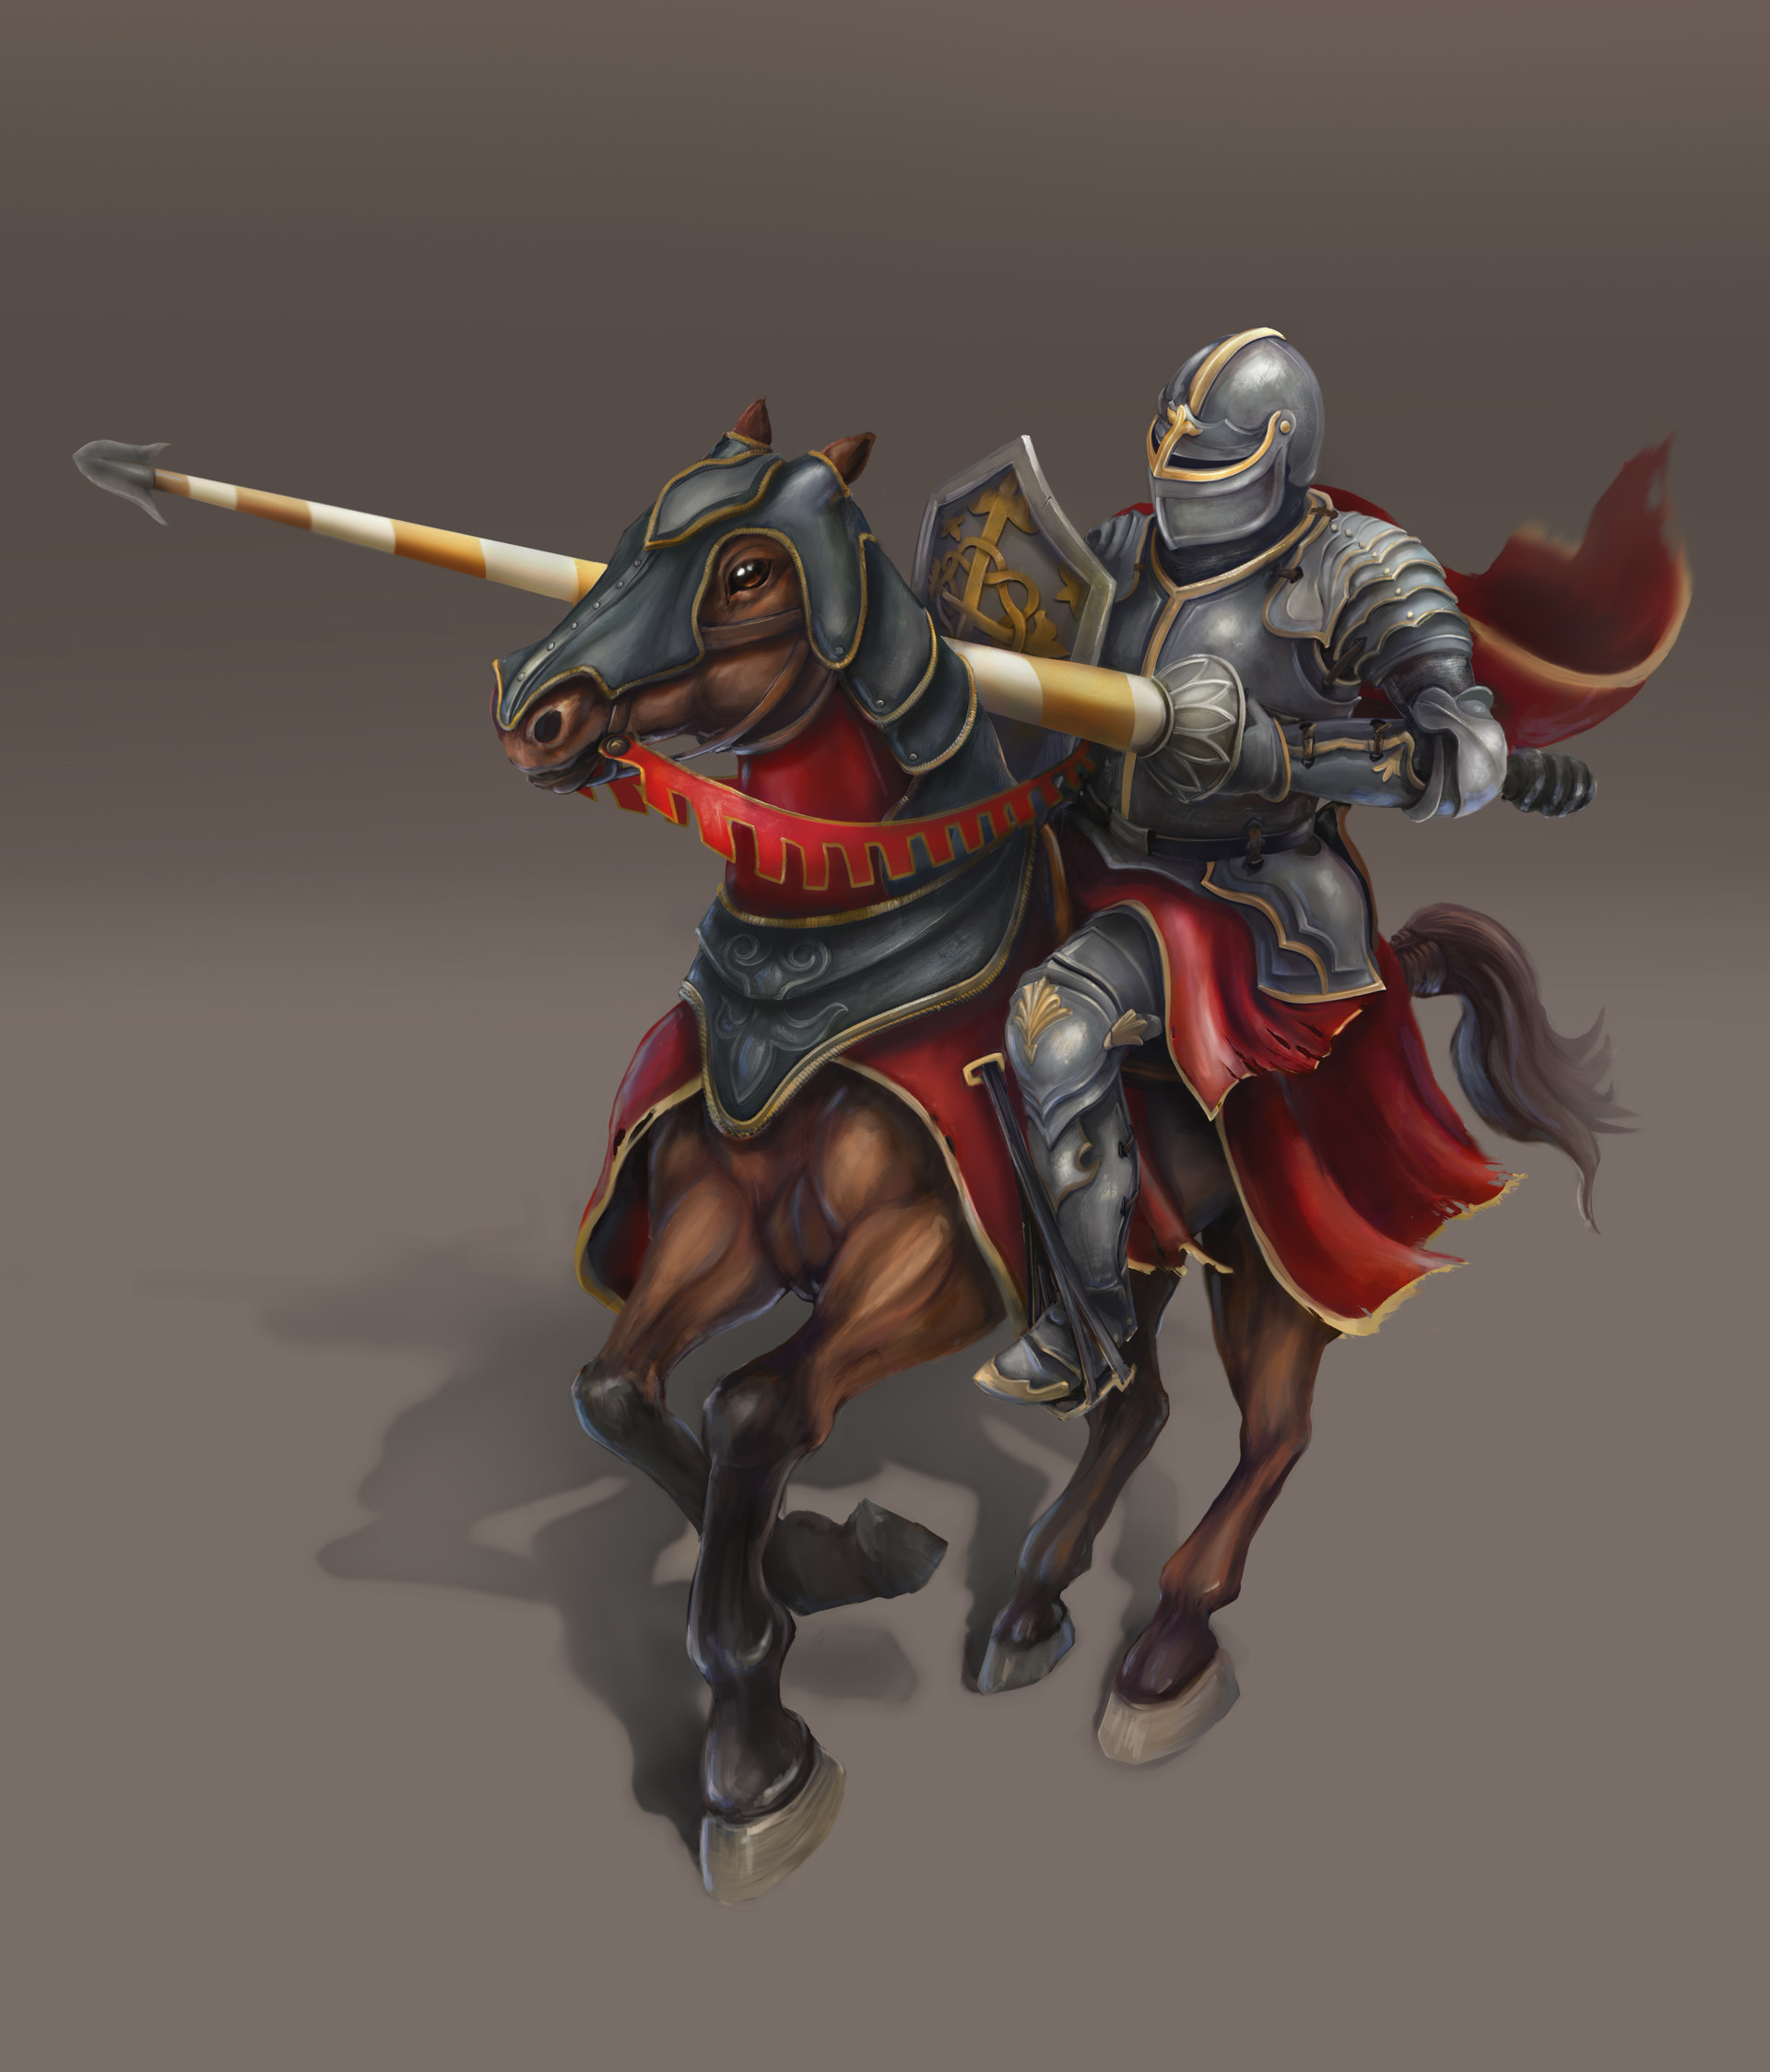 ArtStation - Medieval Knight on a Horse Concept